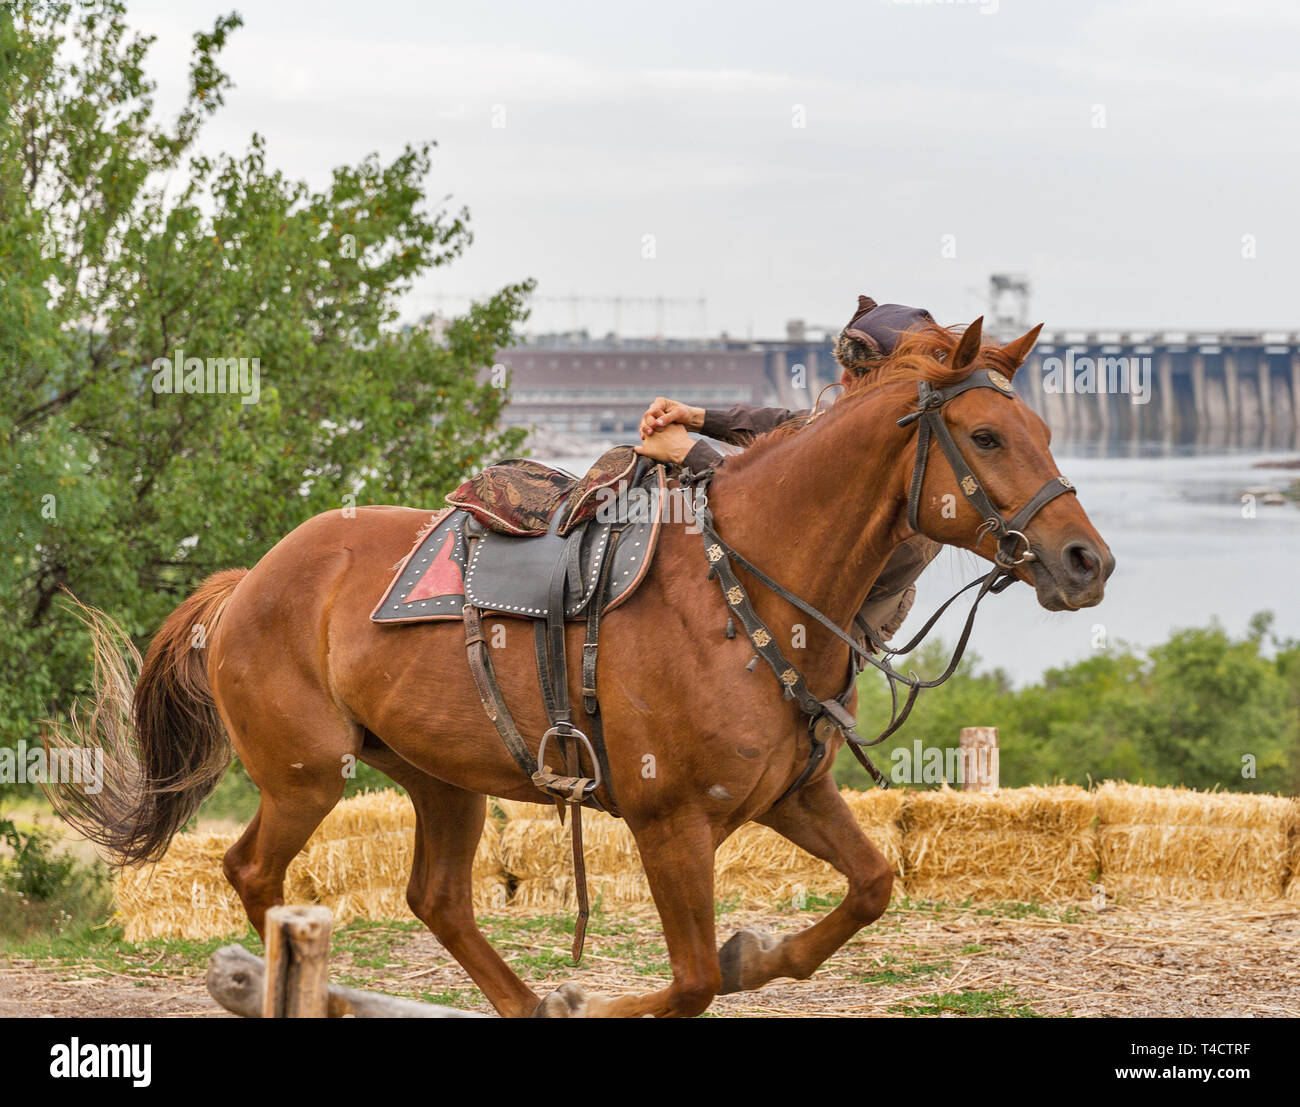 Unrecognized Ukrainian Cossack doing tricks on a horse in Zaporozhian Sich on Khortytsia island, Ukraine. Hydroelectric power station Dneproges in the Stock Photo